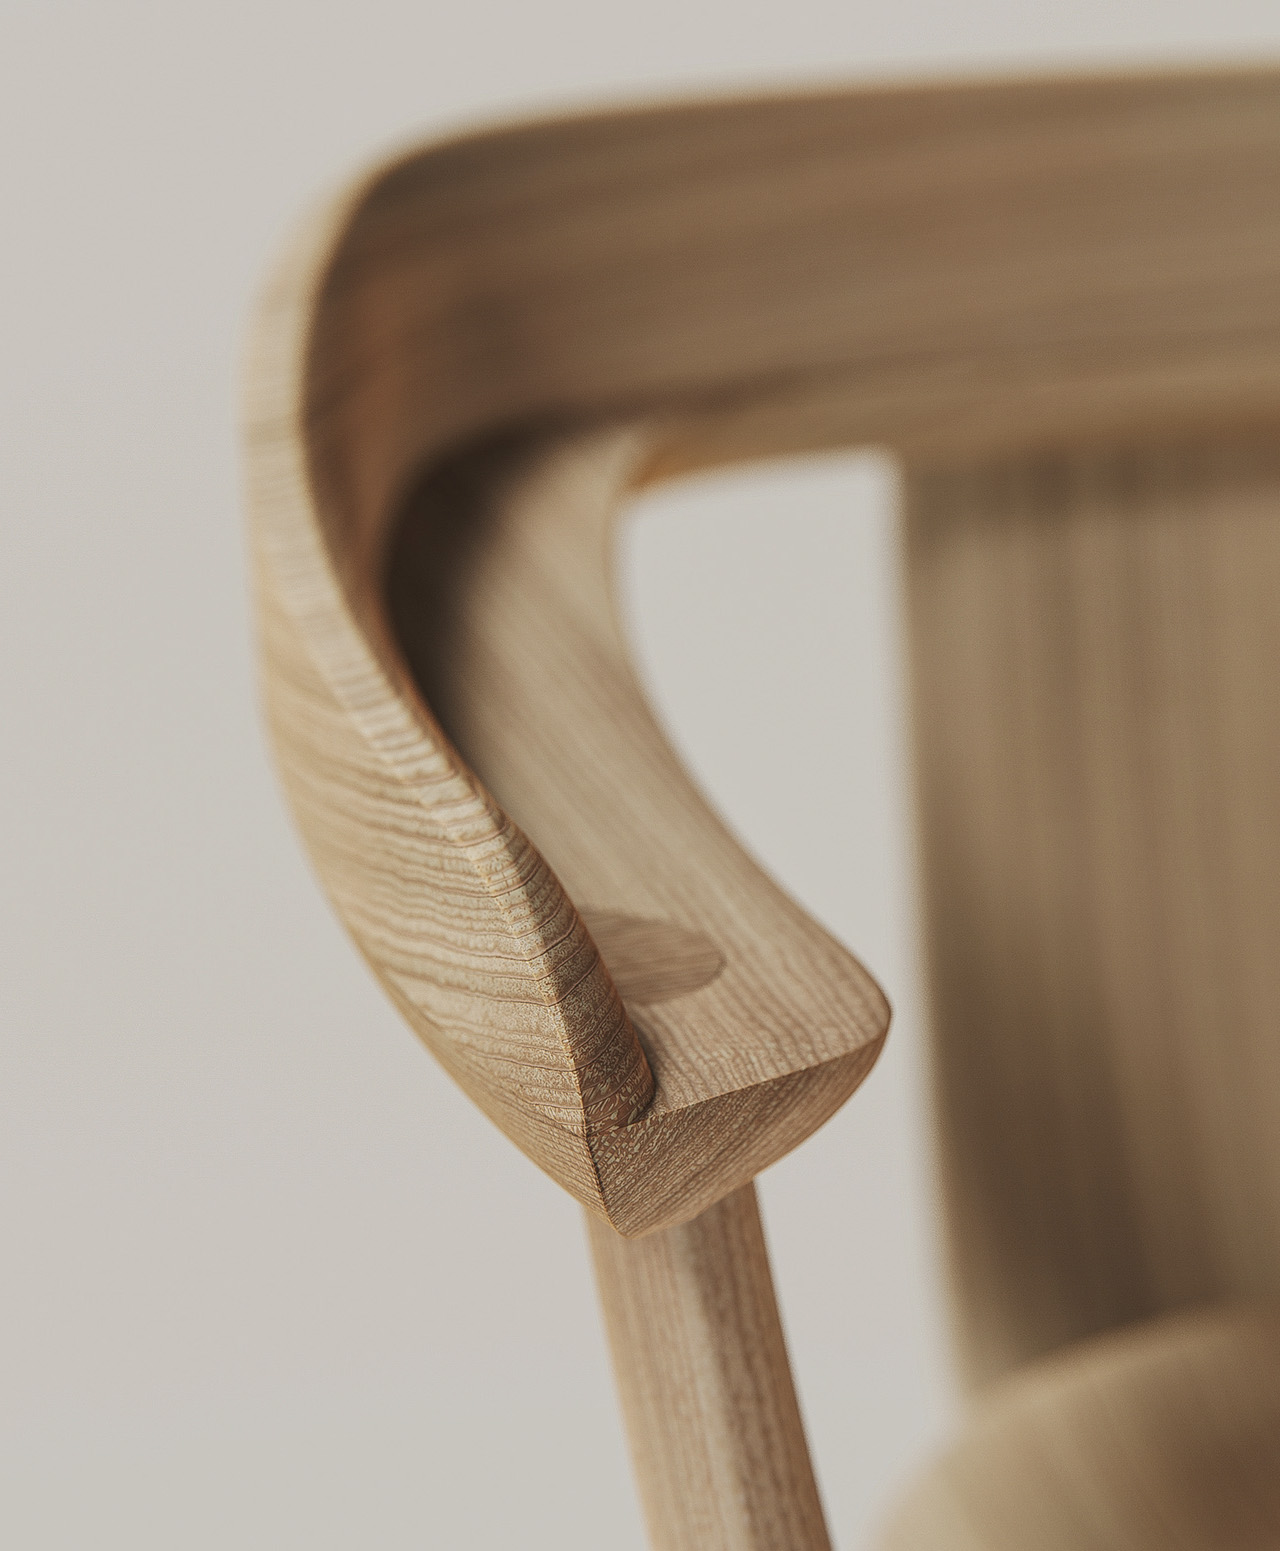 This wooden + minimal chair is the perfect culmination of form + functionality